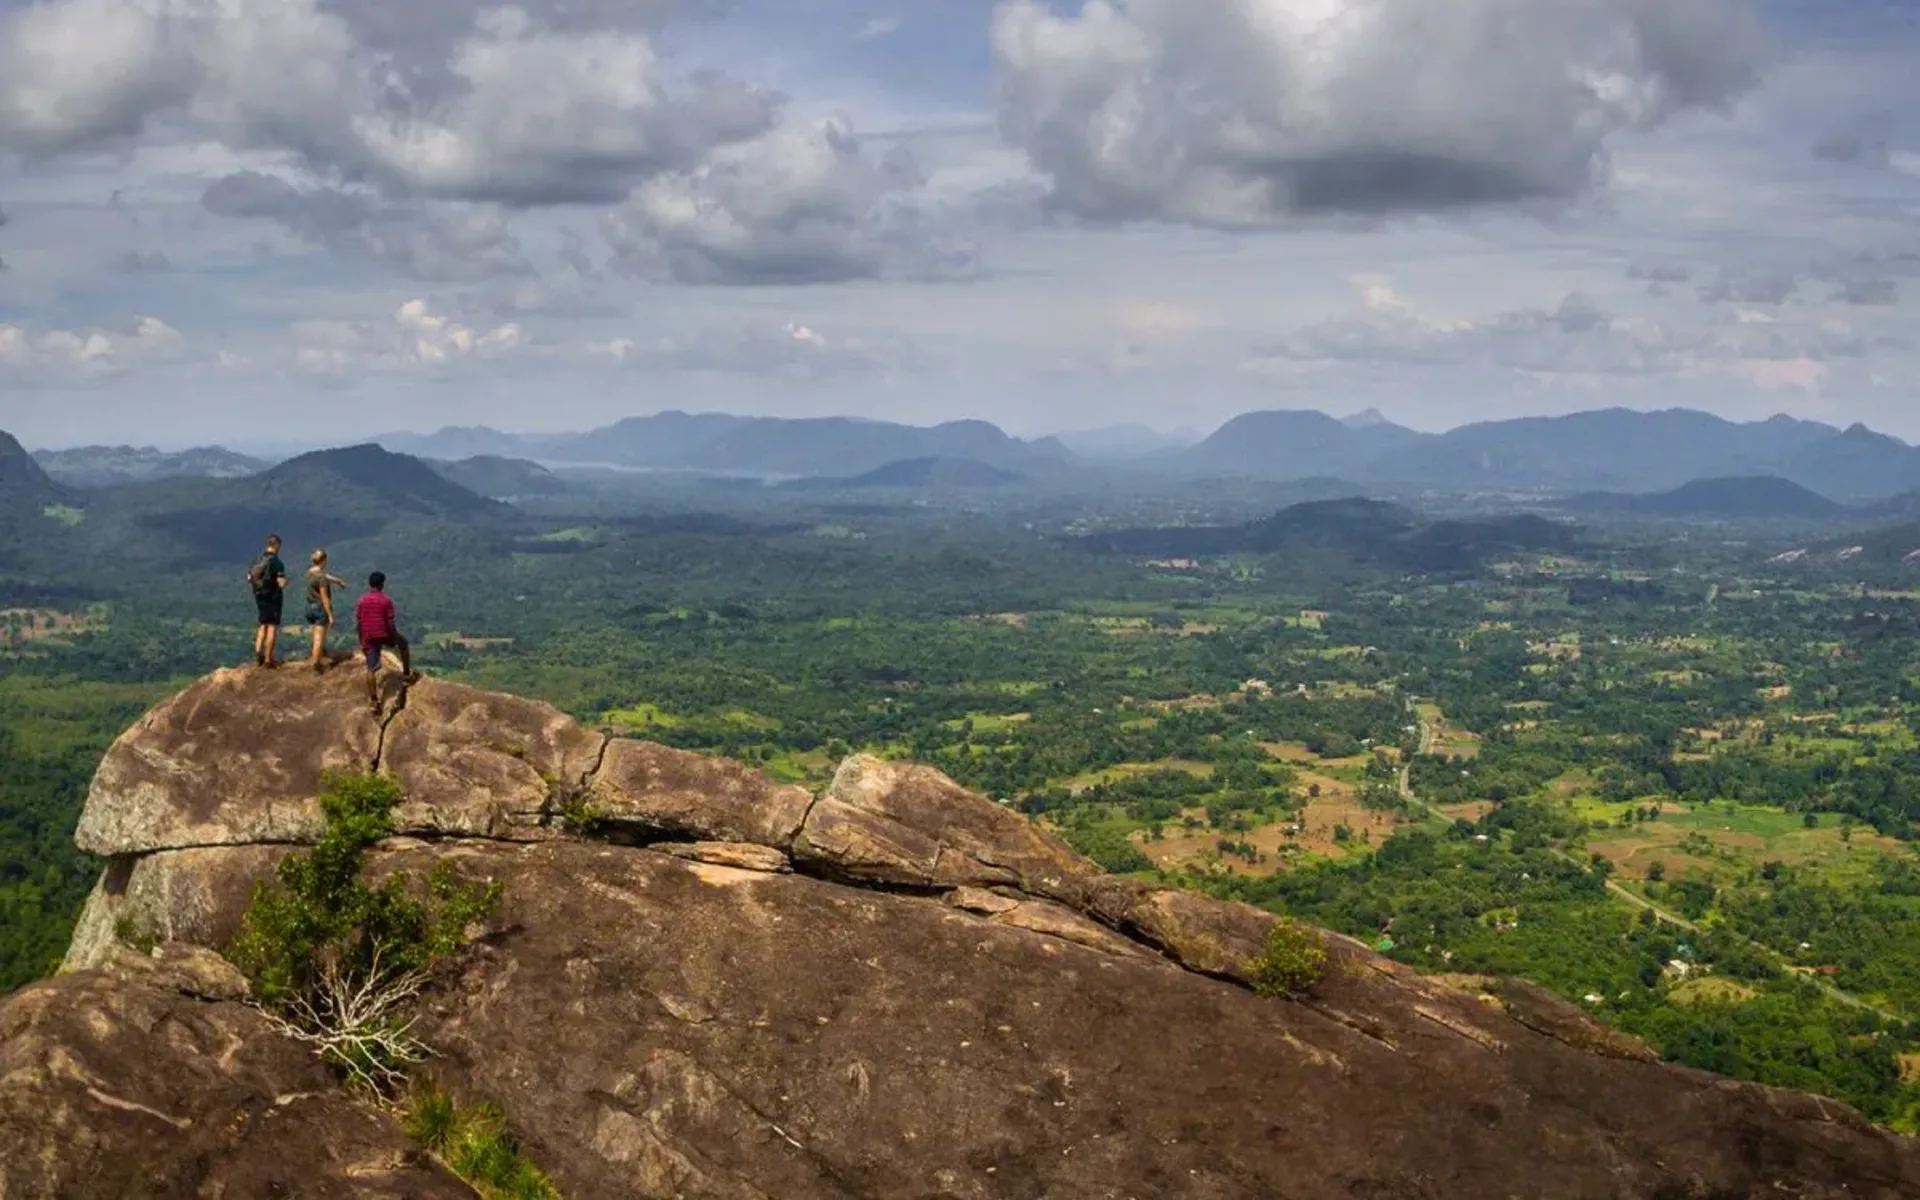 A lookout point in Gal Oya National Park provides an astonishing panorama of the lush green landscapes.